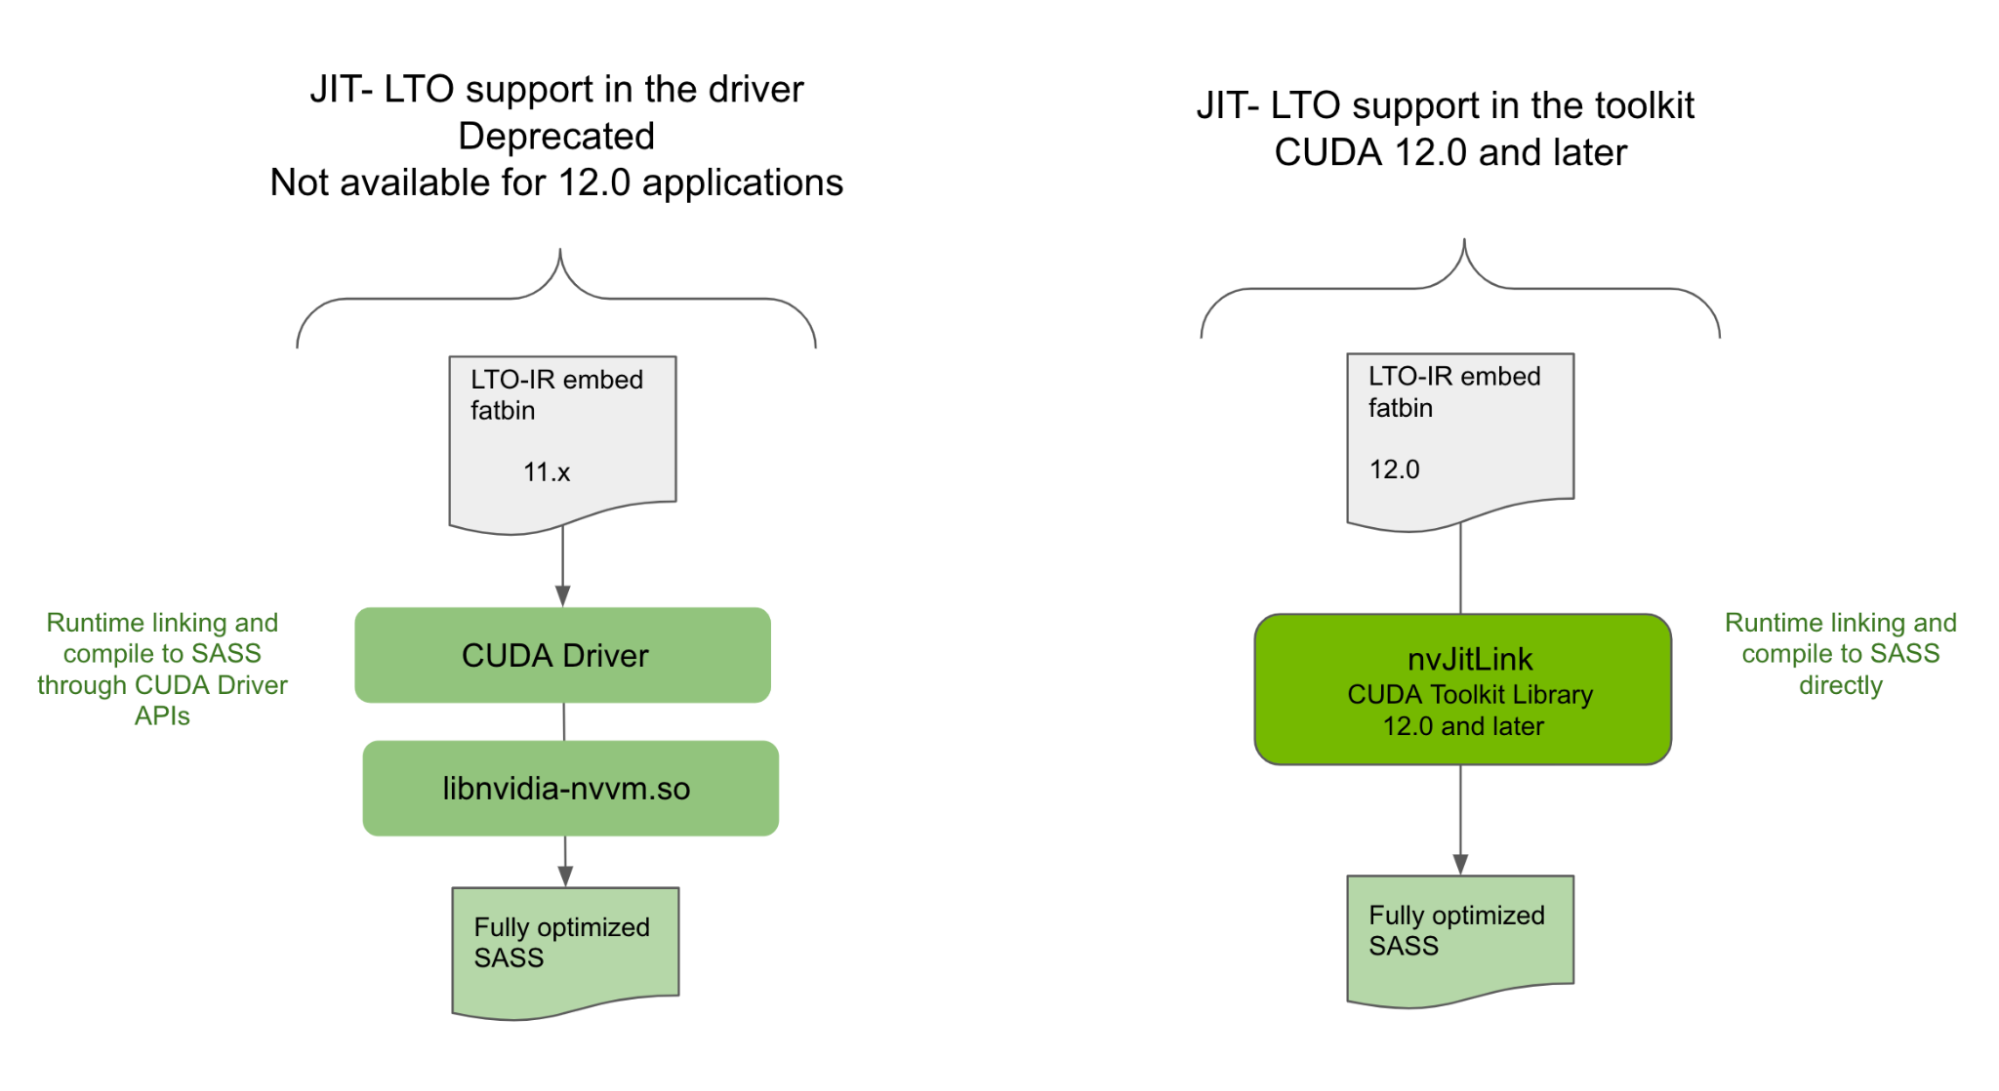 Graphic showing deprecation of older implementation of JIT LTO. Left side shows JIT LTO previewed in CUDA 11.4 is deprecated, available only for 11.x applications shipped with LTO-IR and not available for 12.0 applications. Right side shows new nvJitLink library usage for  JIT LTO for CUDA 12.0 and later applications.